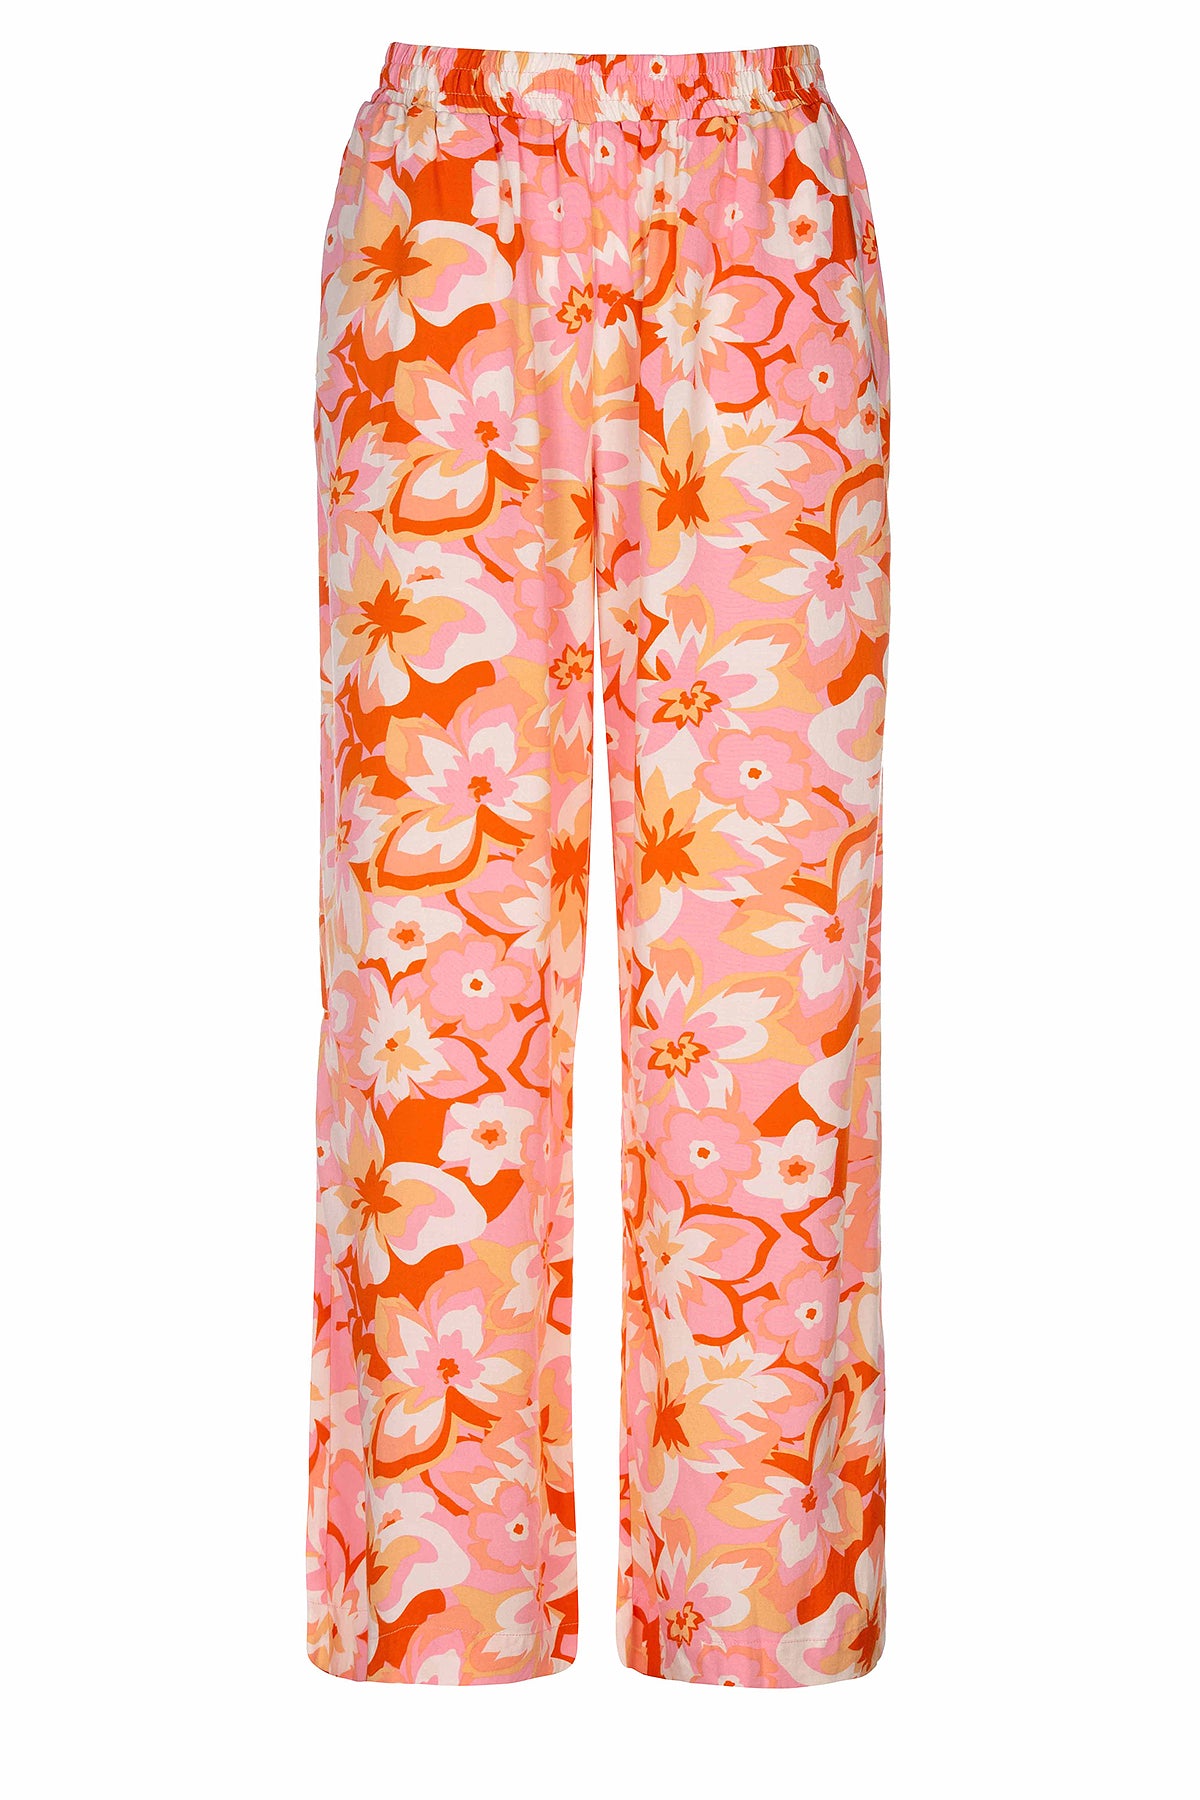 LUXZUZ // ONE TWO Eilee Pant Pant 380 Sachet Pink